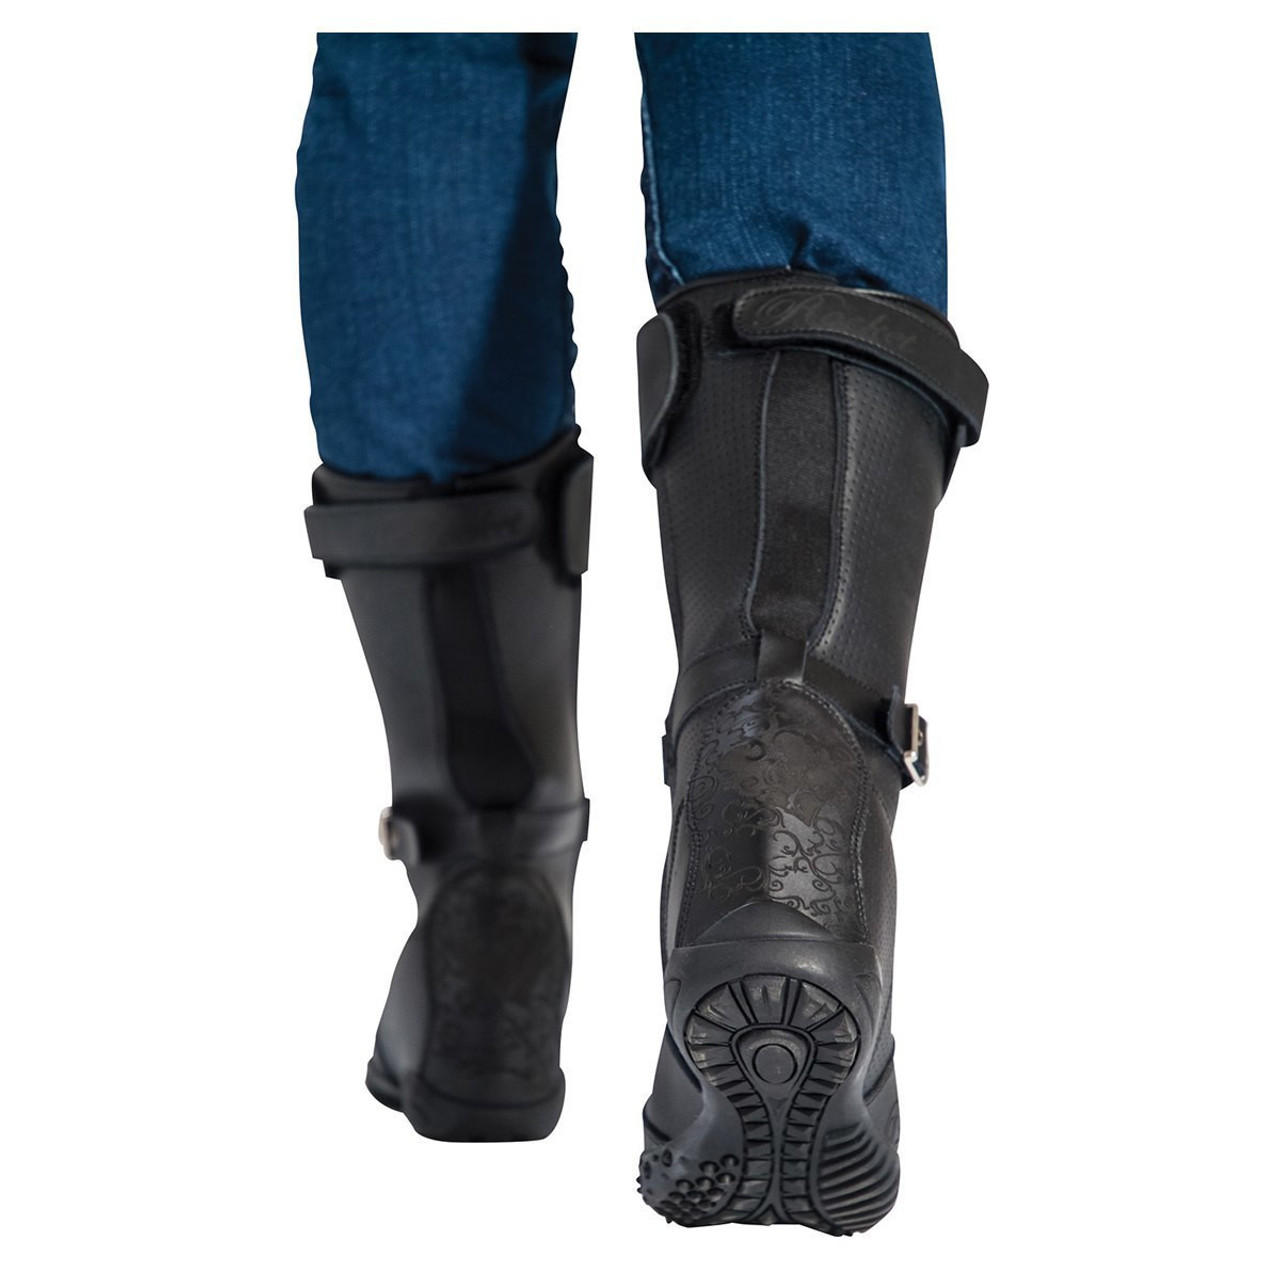 Heartbreaker Motorcycle Riding Boots 